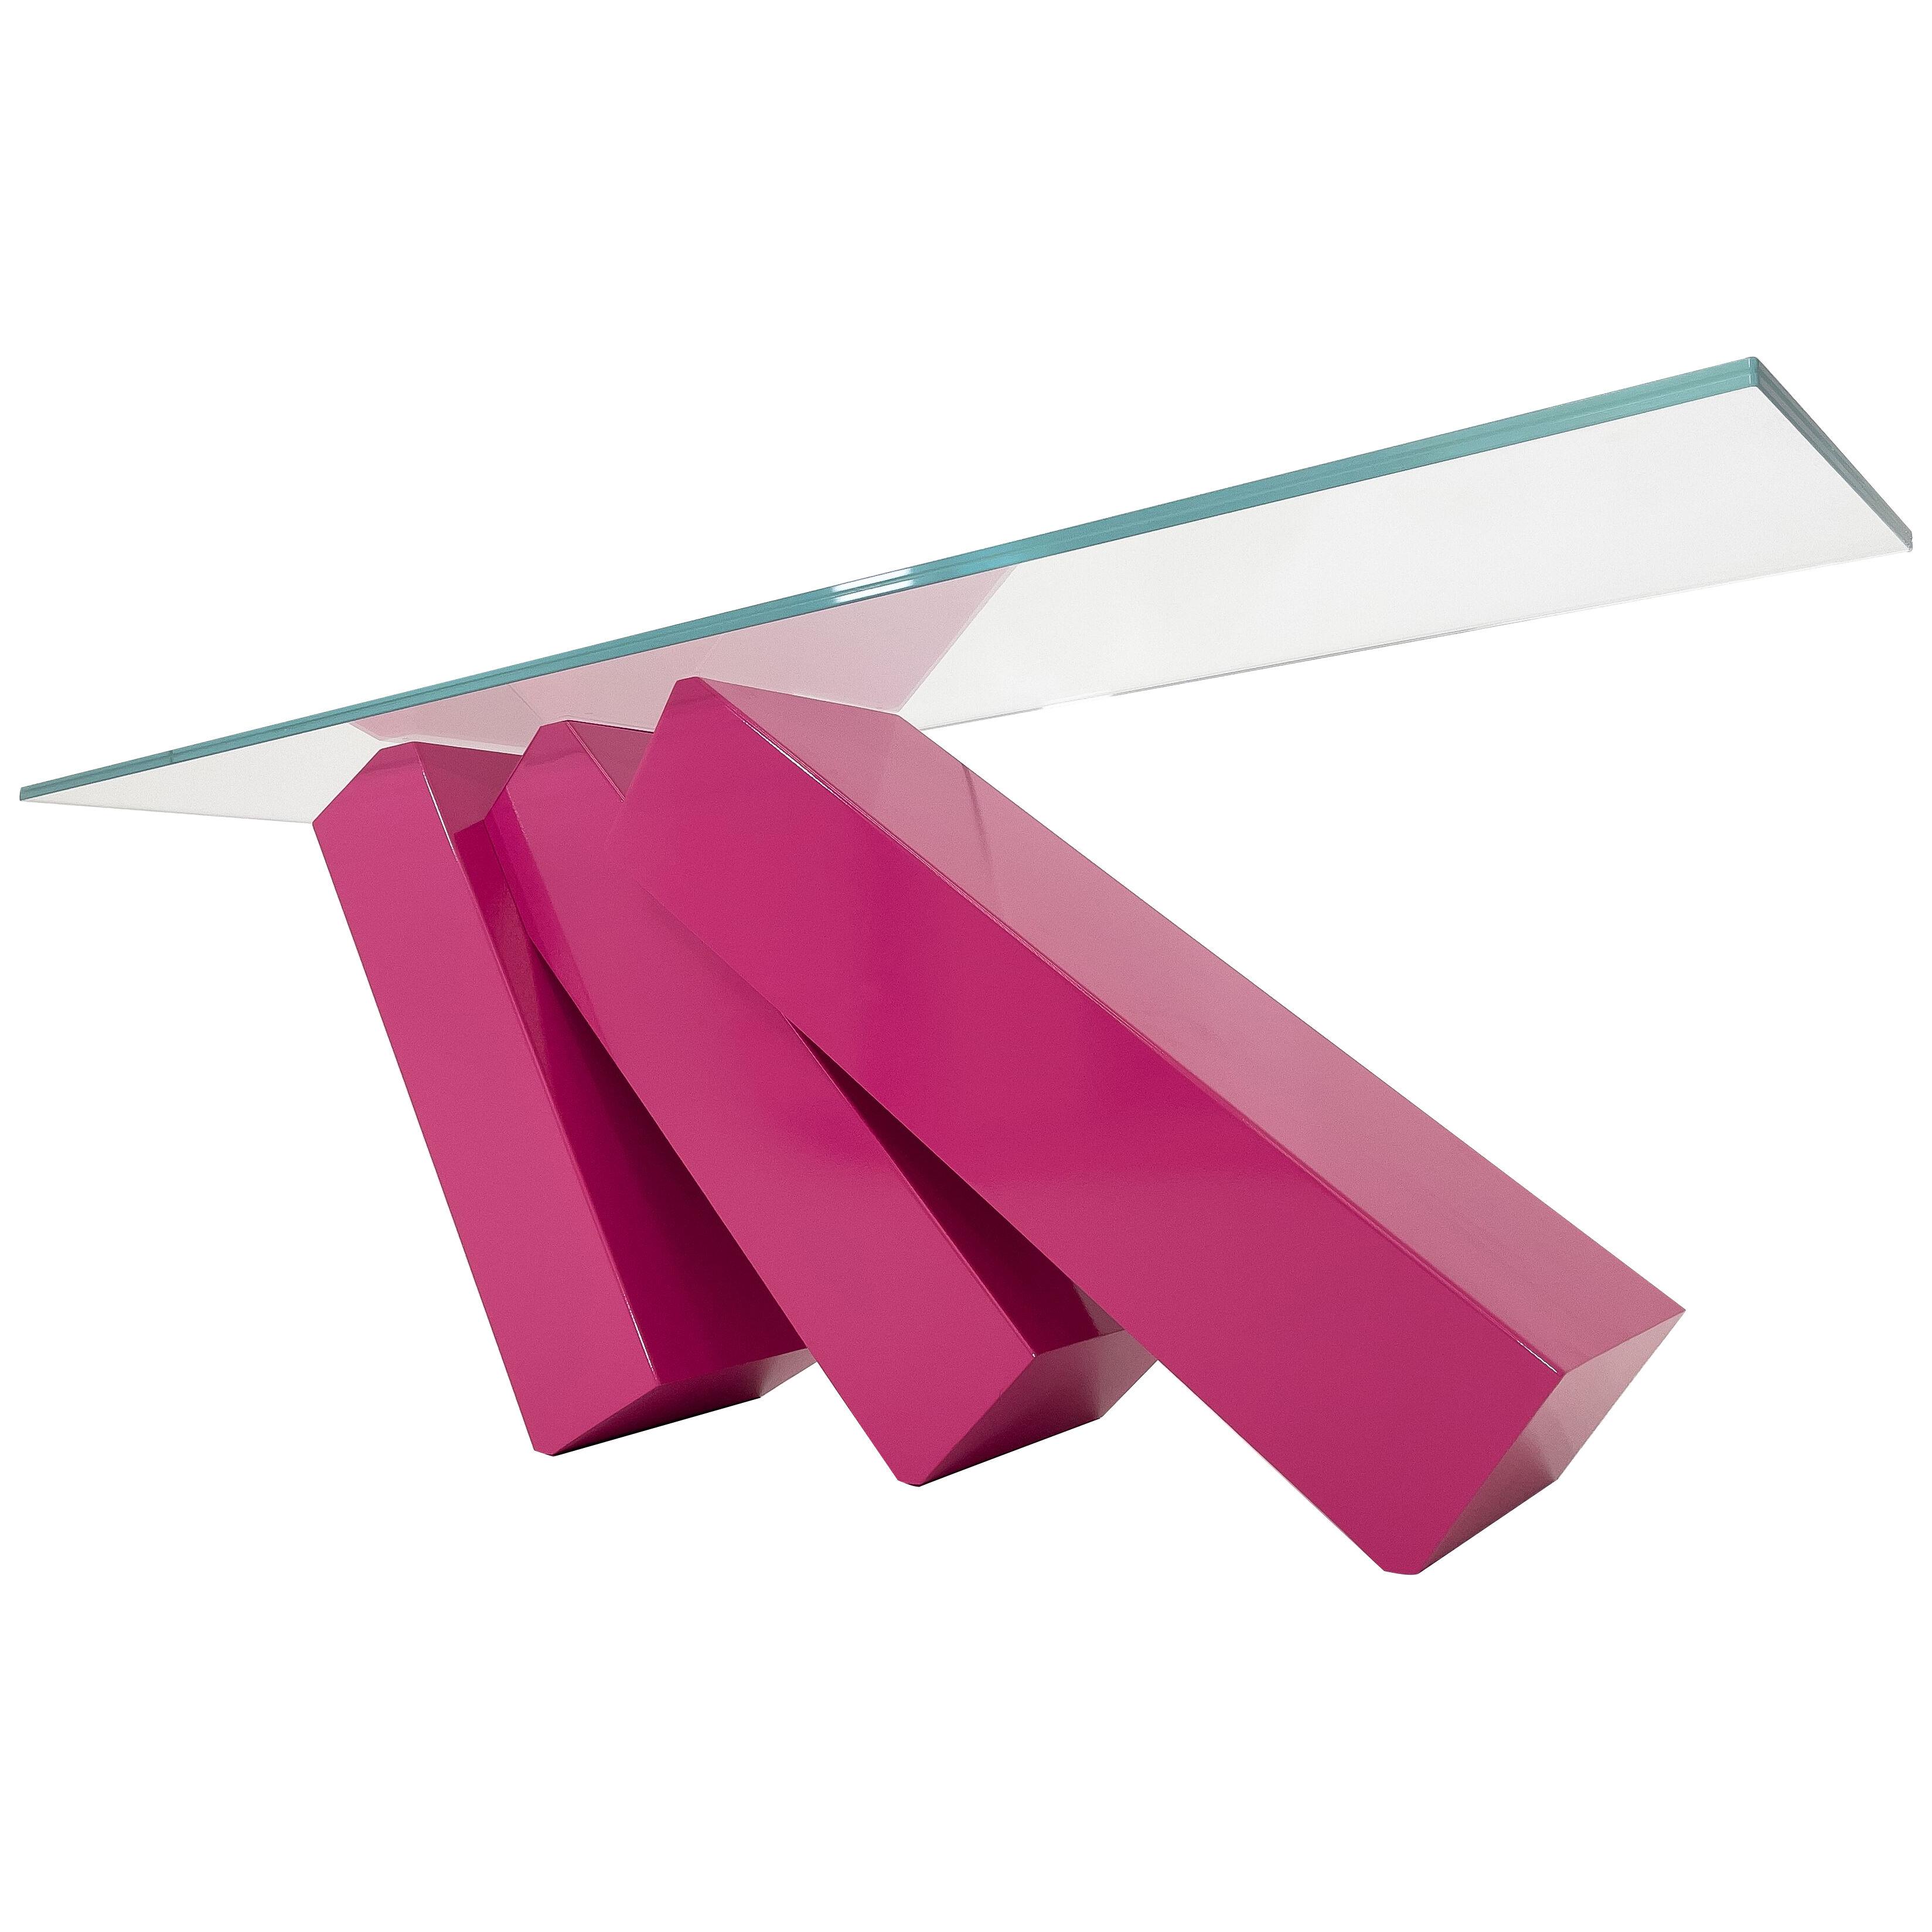 Monolith Console Table - Pink Edition